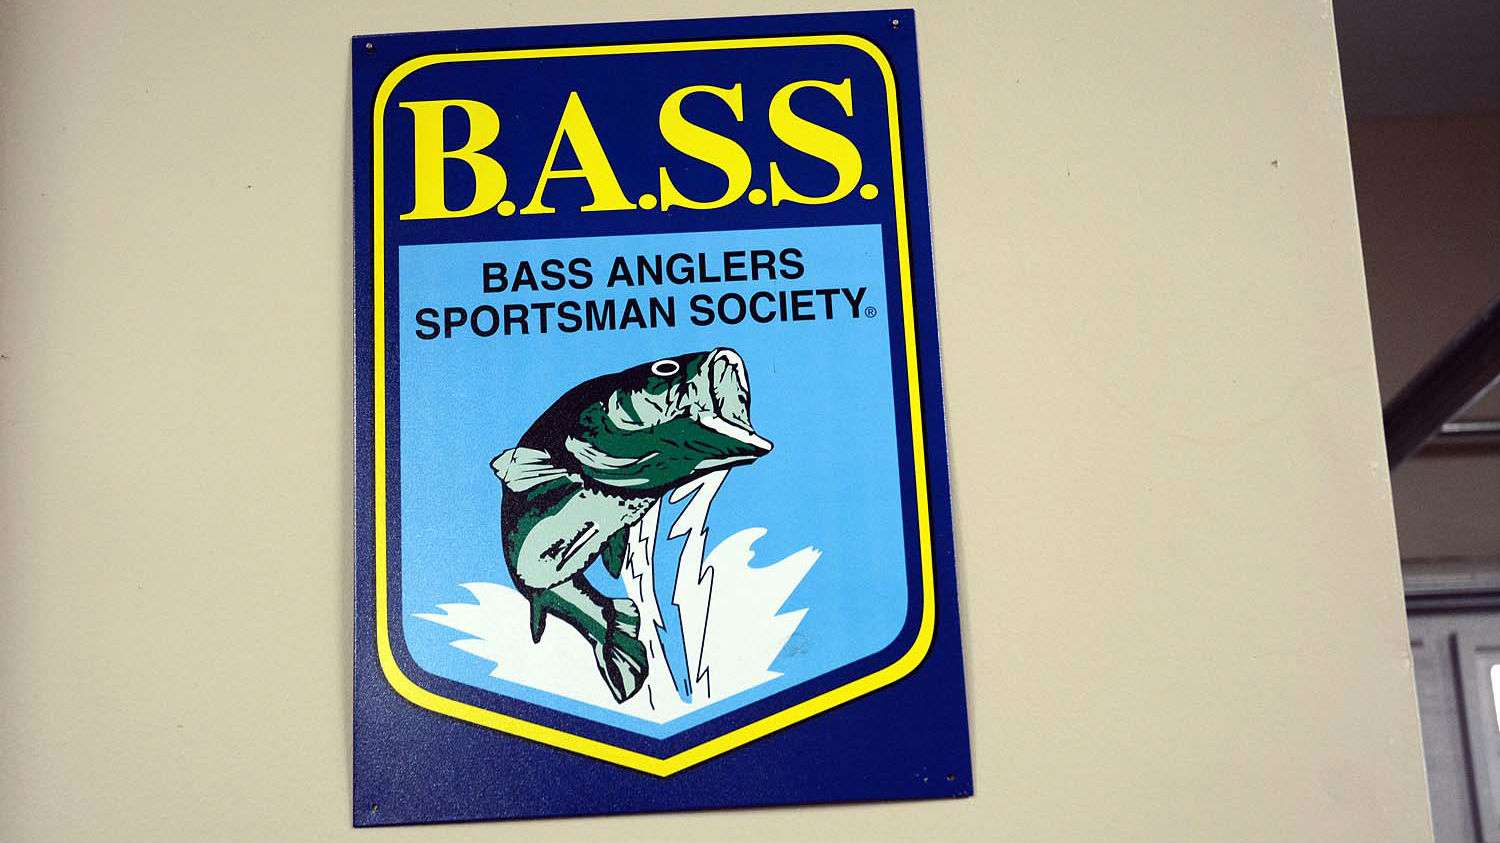 This wall of the cave features a vintage look with an old B.A.S.S. member logo shield. When B.A.S.S. was organized Ray Scott added the periods between the letters. Those stand for Bass Anglers Sportsman Society. Lucas found this sign at a flea market in Collinsville, Ala.